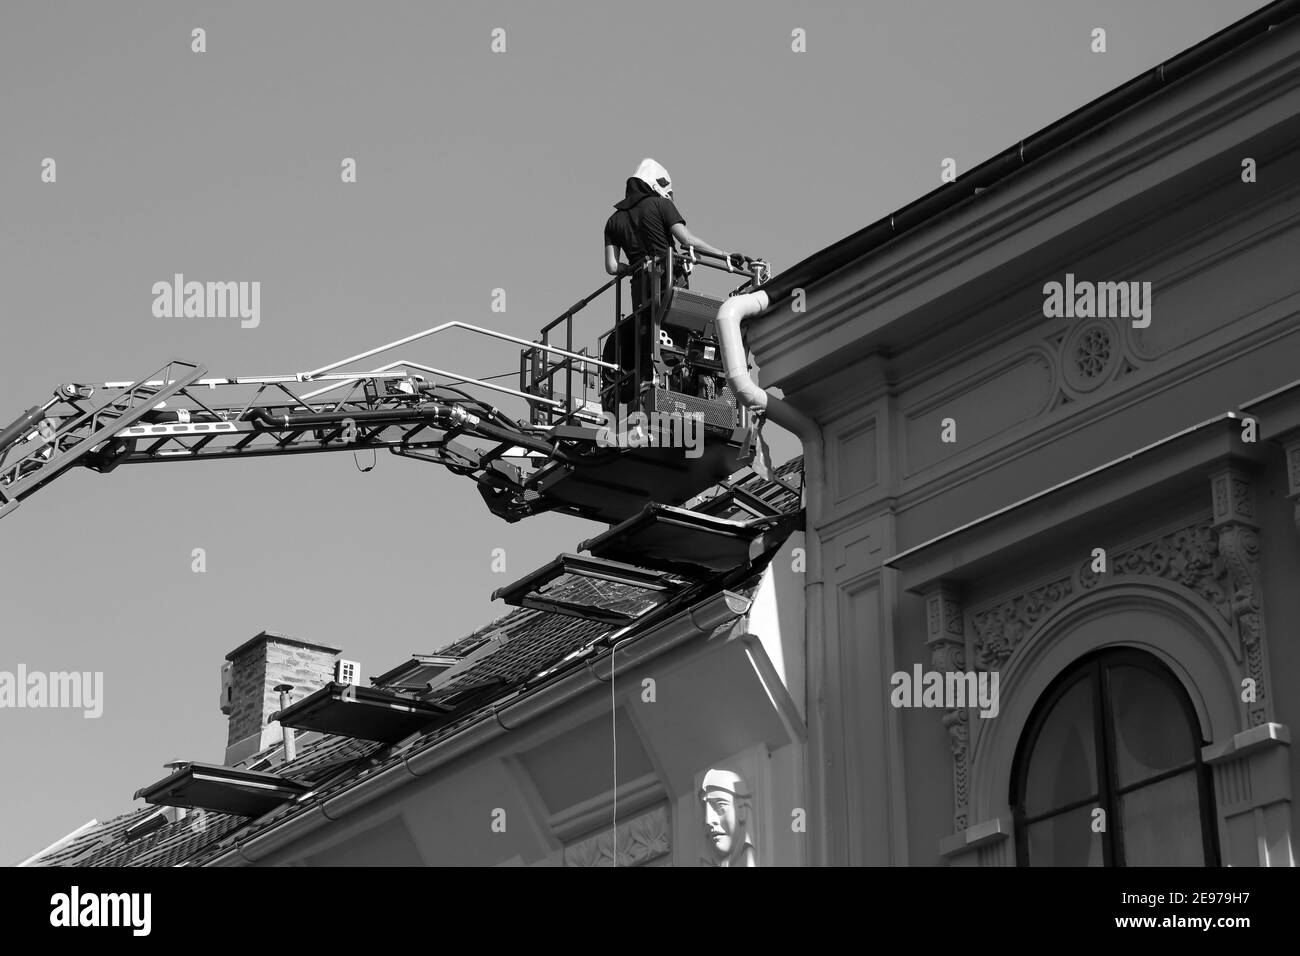 Firefighters intervention on a rooftop of a classic apartment building (B/W) Stock Photo